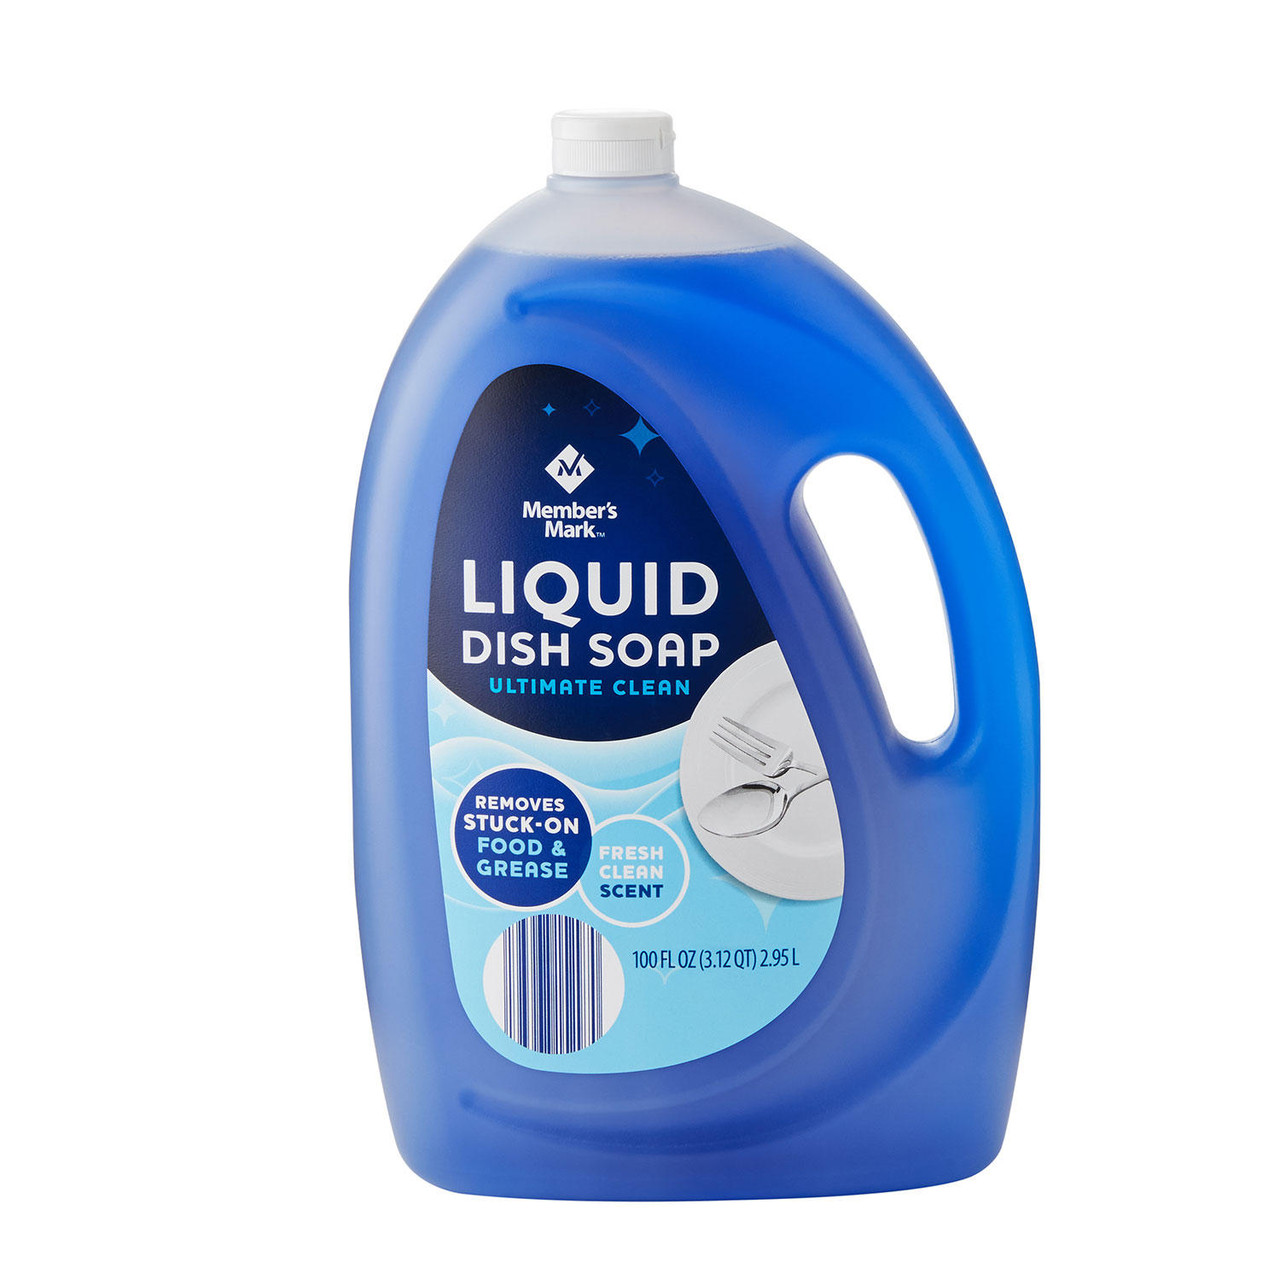 Member's Mark Liquid Dish Soap, Ultimate Clean (100 fl. oz.) - [From 41.00 - Choose pk Qty ] - *Ships from Miami